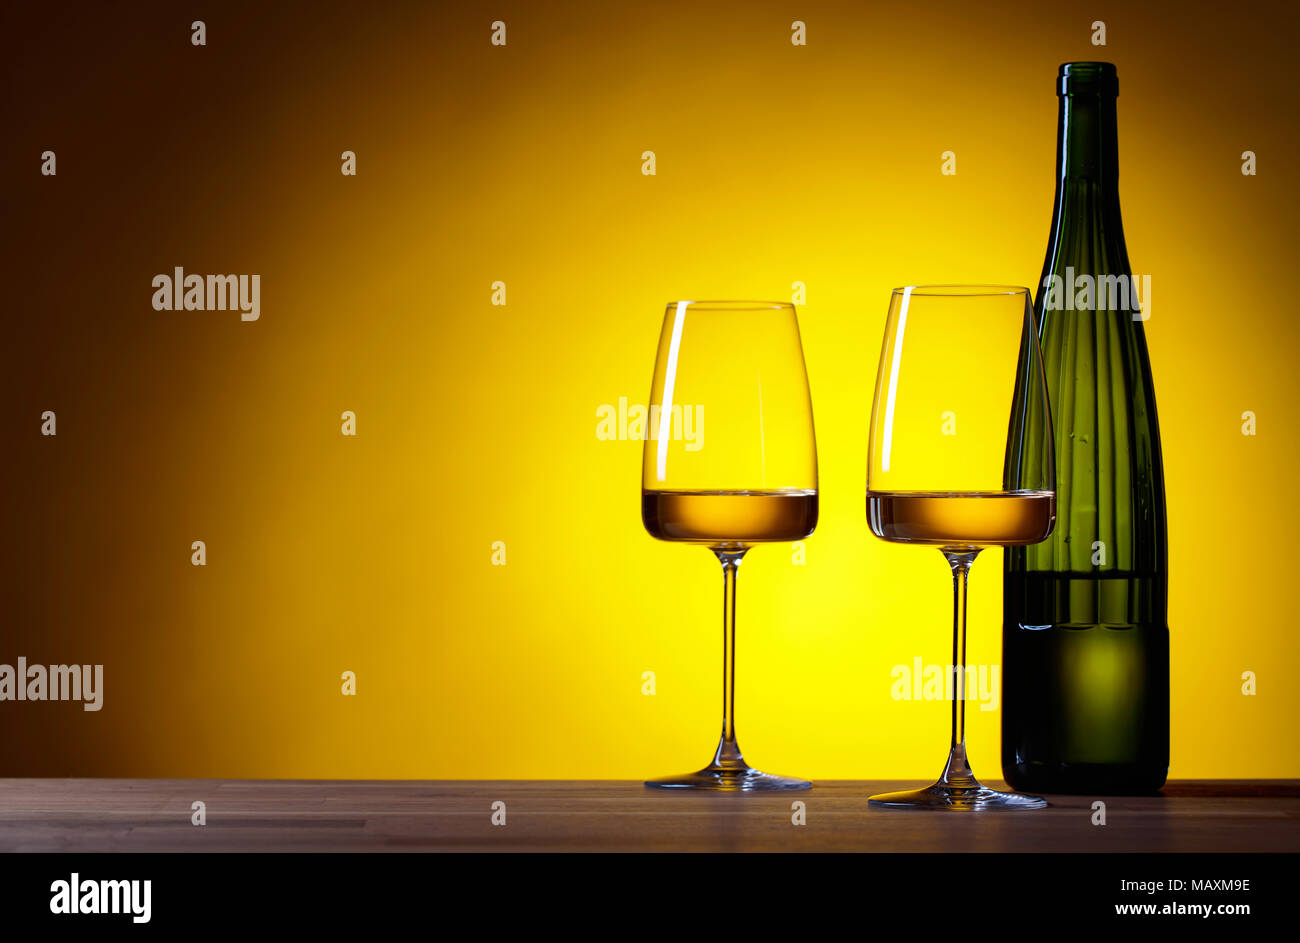 Download Glasses And Bottle Of White Wine On A Yellow Background Copy Space Stock Photo Alamy Yellowimages Mockups